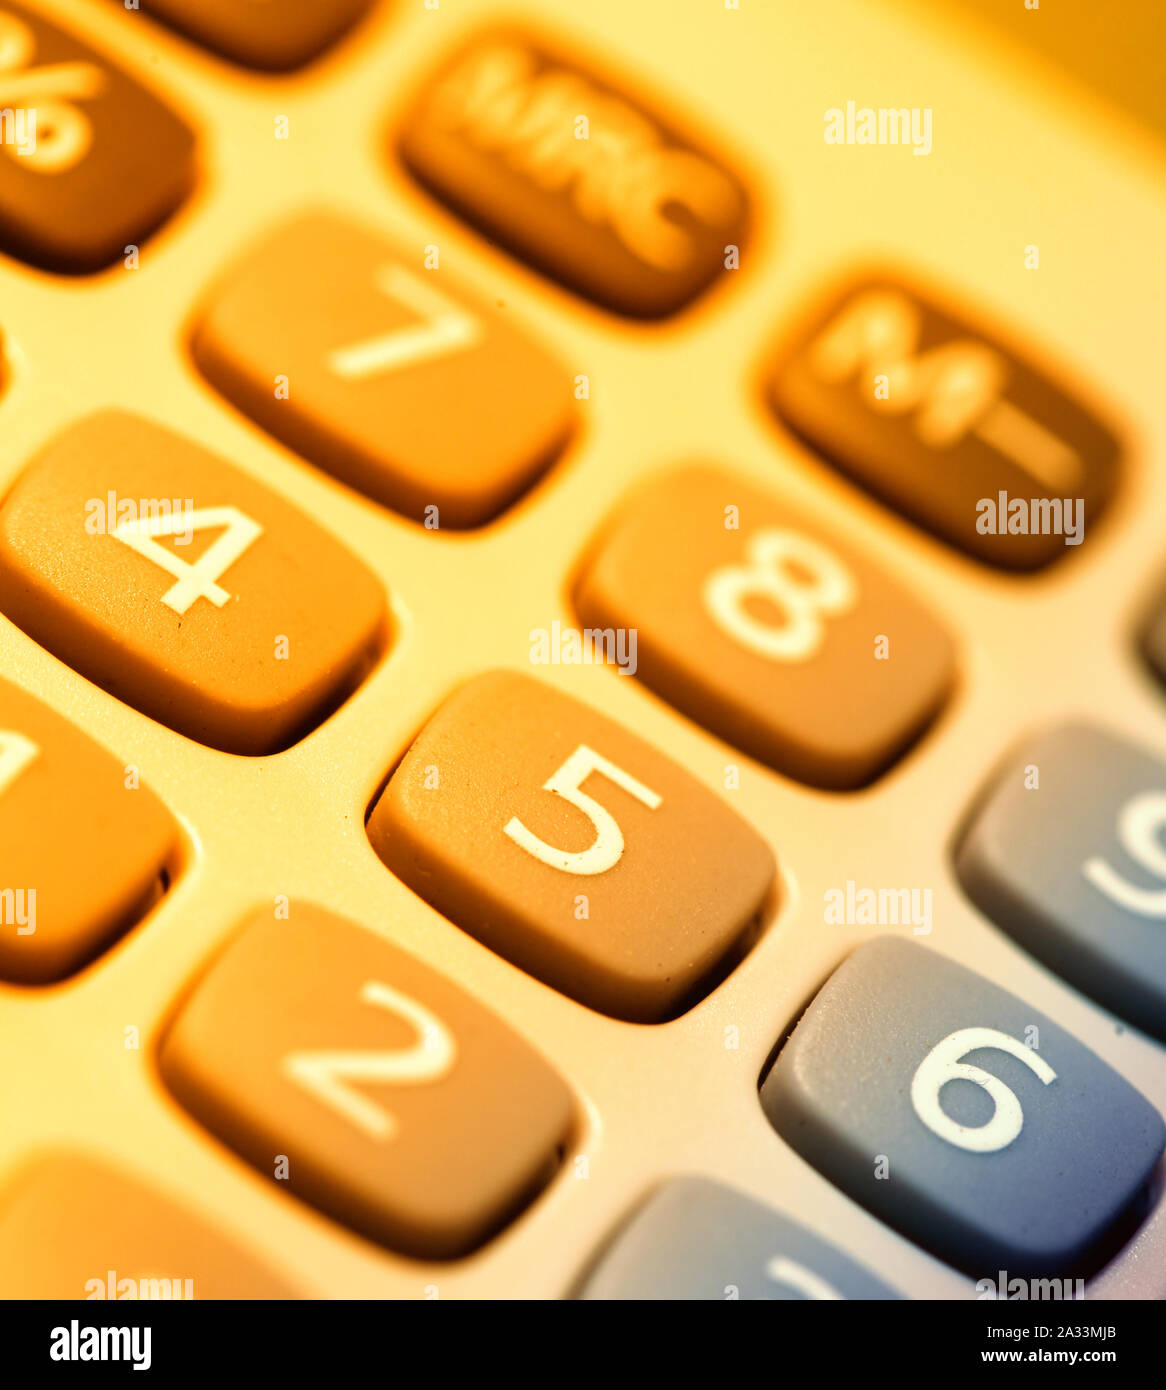 Close up of Calculator key pad buttons Stock Photo